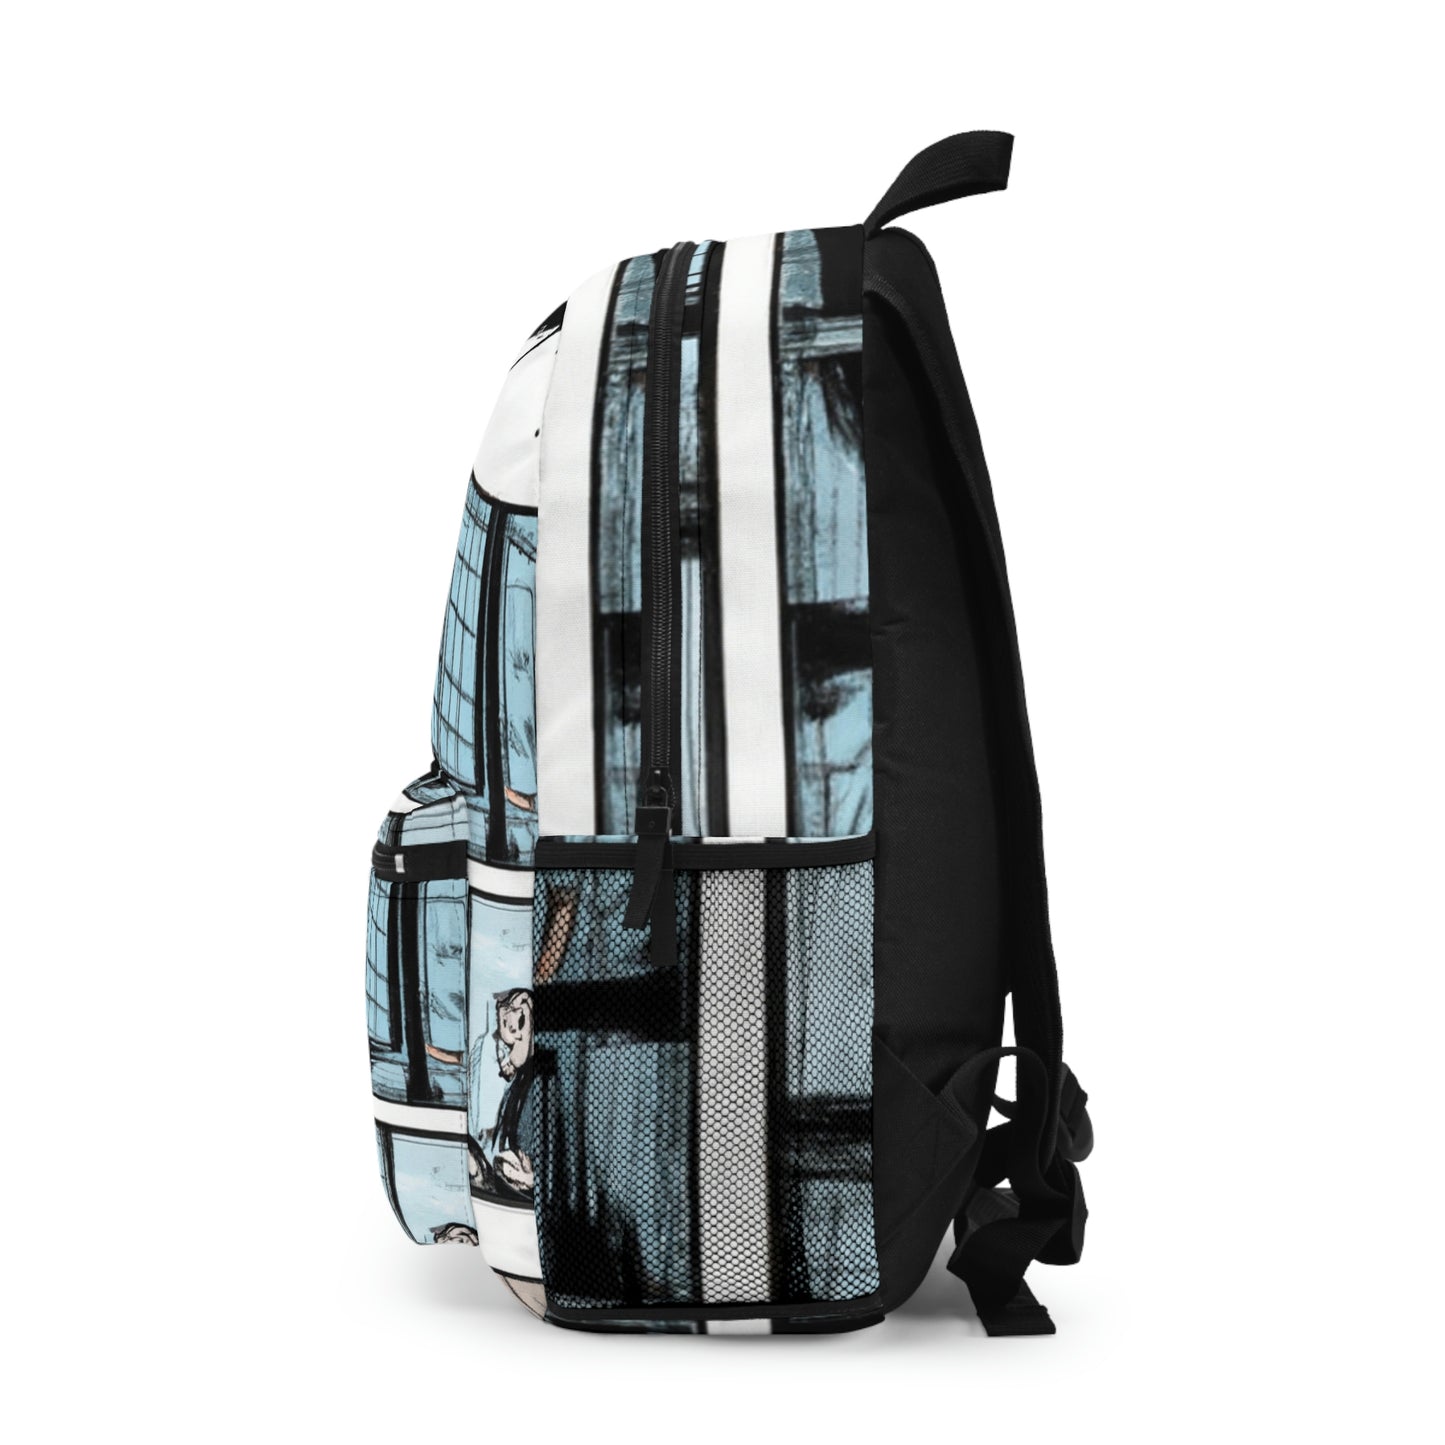 Curtis "The Catastrophe" Crane - Comic Book Backpack